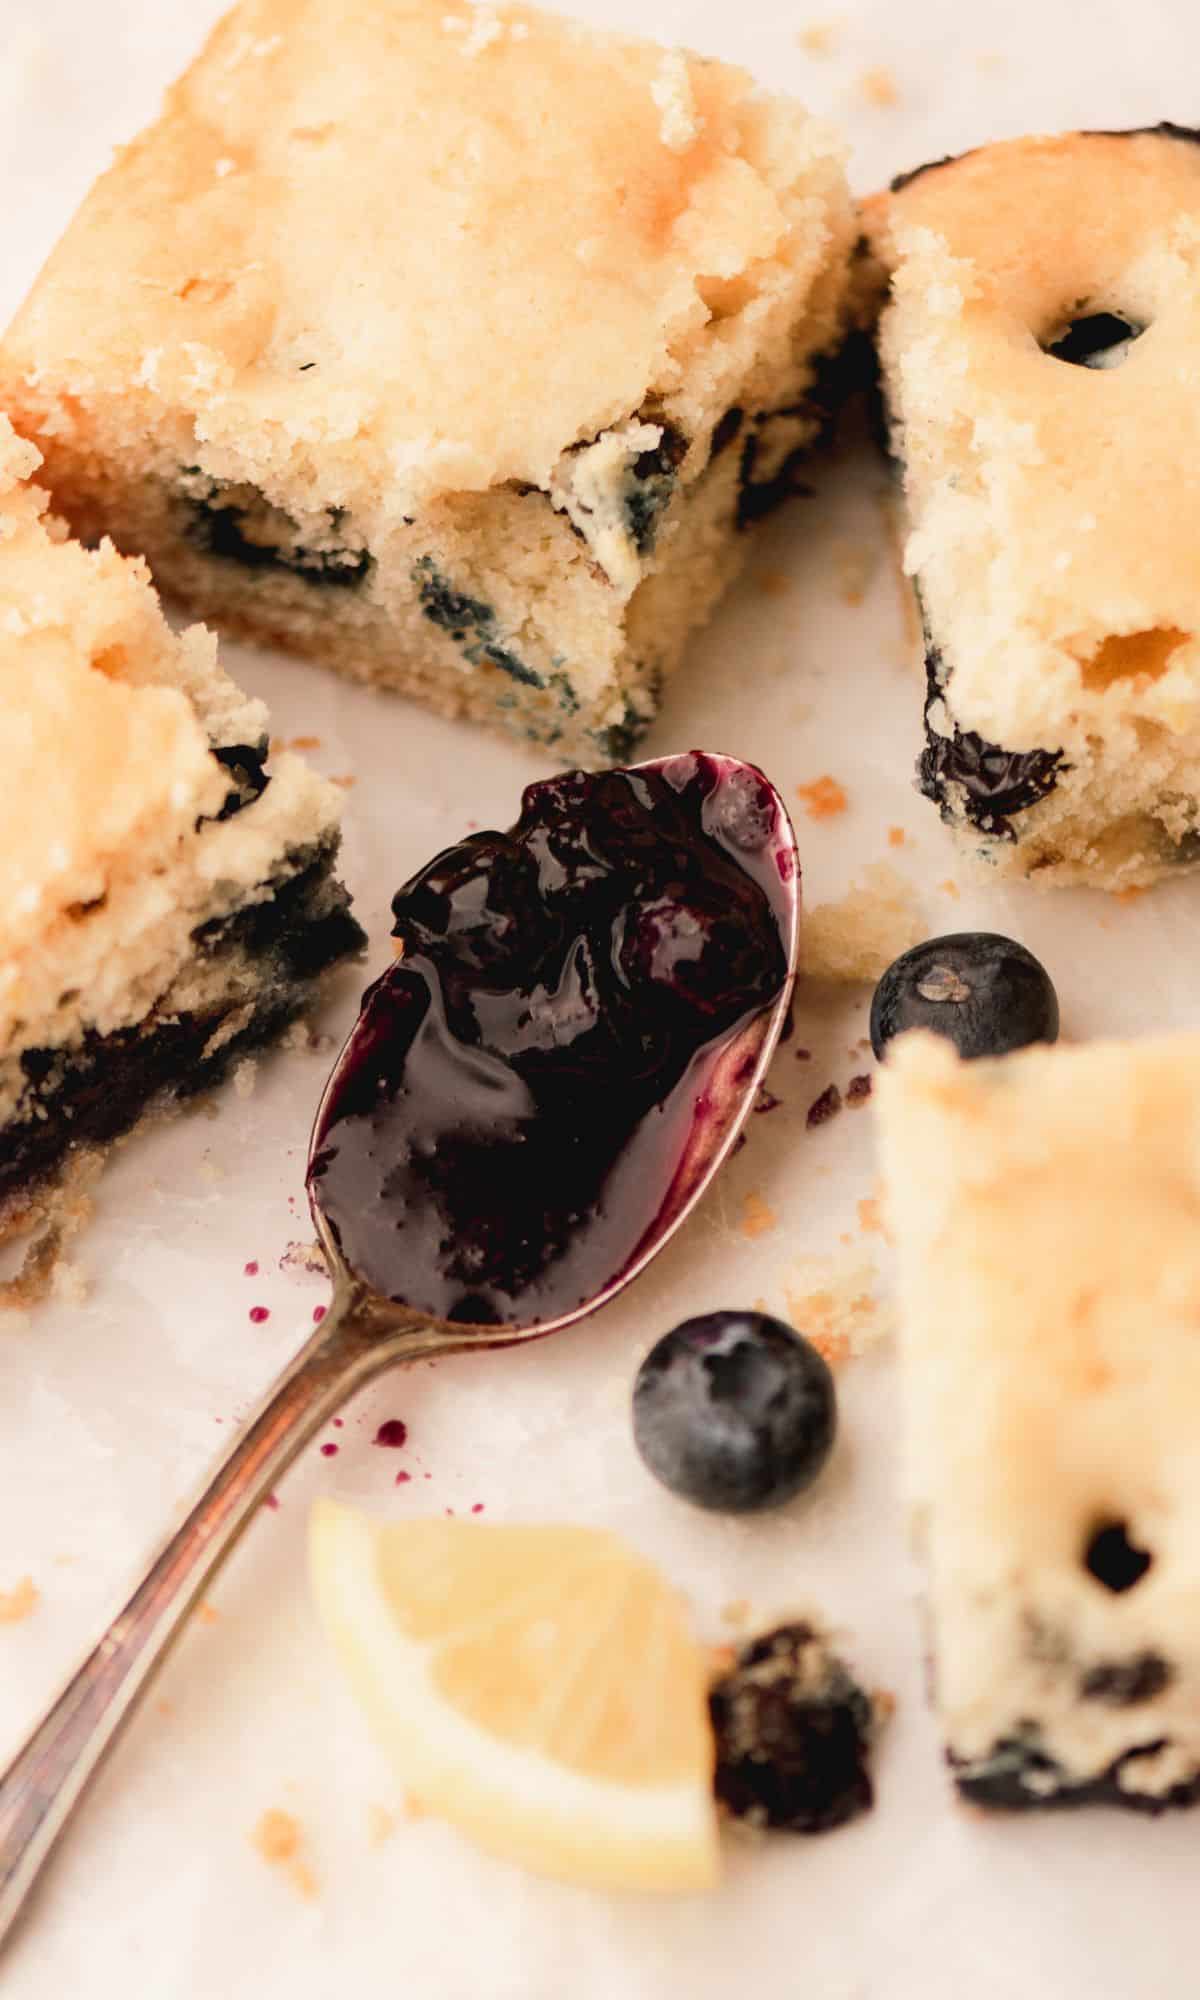 Buttermilk cake with blueberries and a spoon with blueberry compote on it.